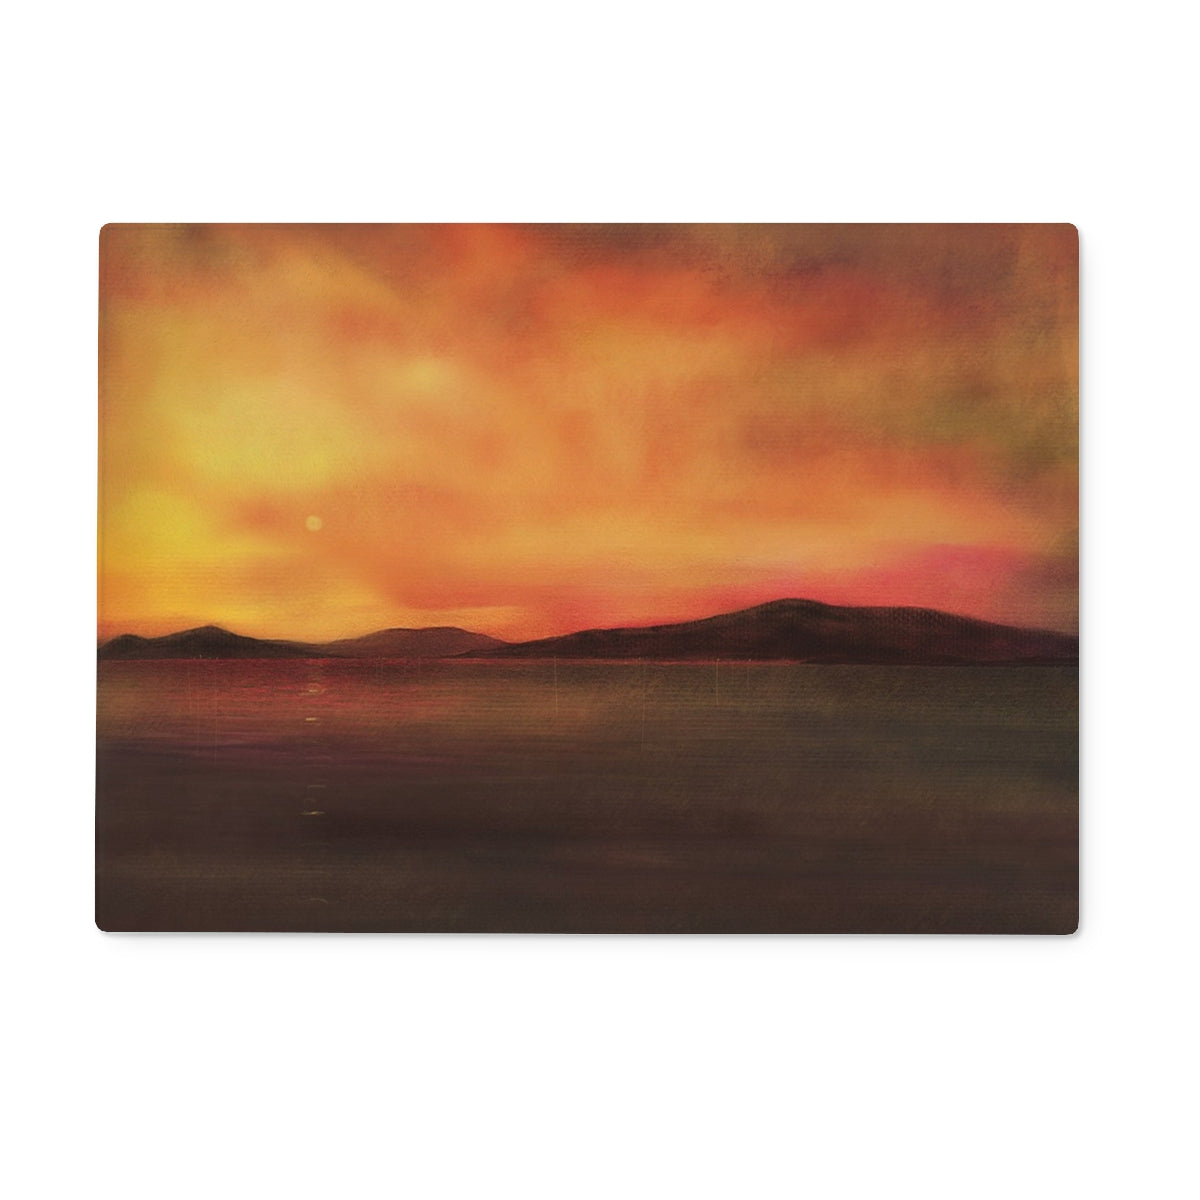 Harris Sunset Art Gifts Glass Chopping Board-Glass Chopping Boards-Hebridean Islands Art Gallery-15"x11" Rectangular-Paintings, Prints, Homeware, Art Gifts From Scotland By Scottish Artist Kevin Hunter